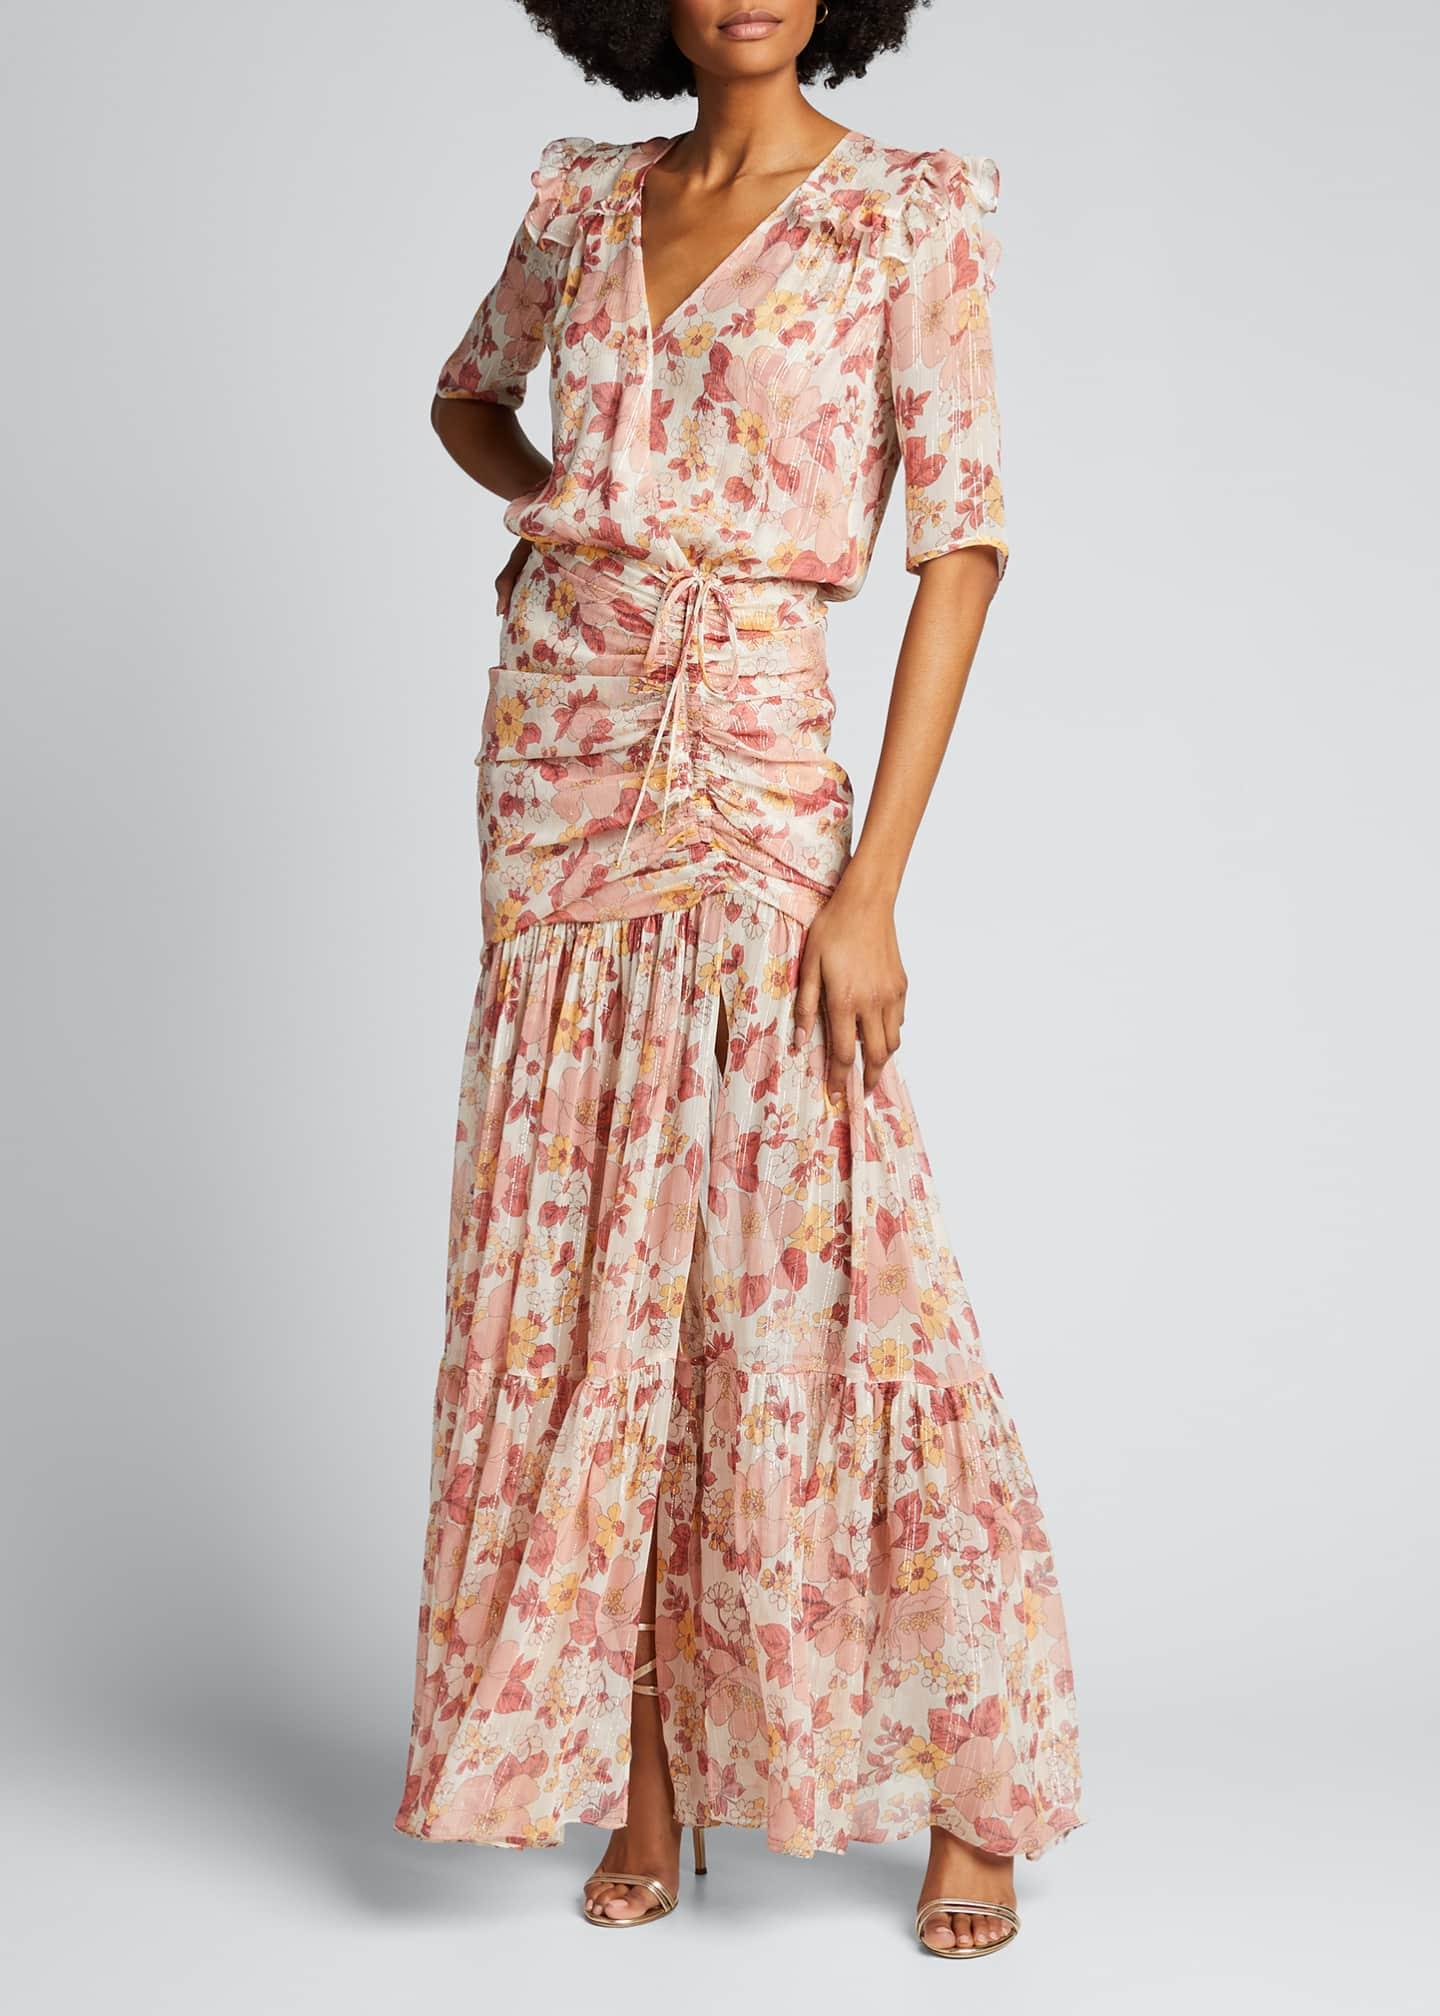 Veronica Beard Silk Mick Ruched Floral-print Long Dress in Pink - Lyst